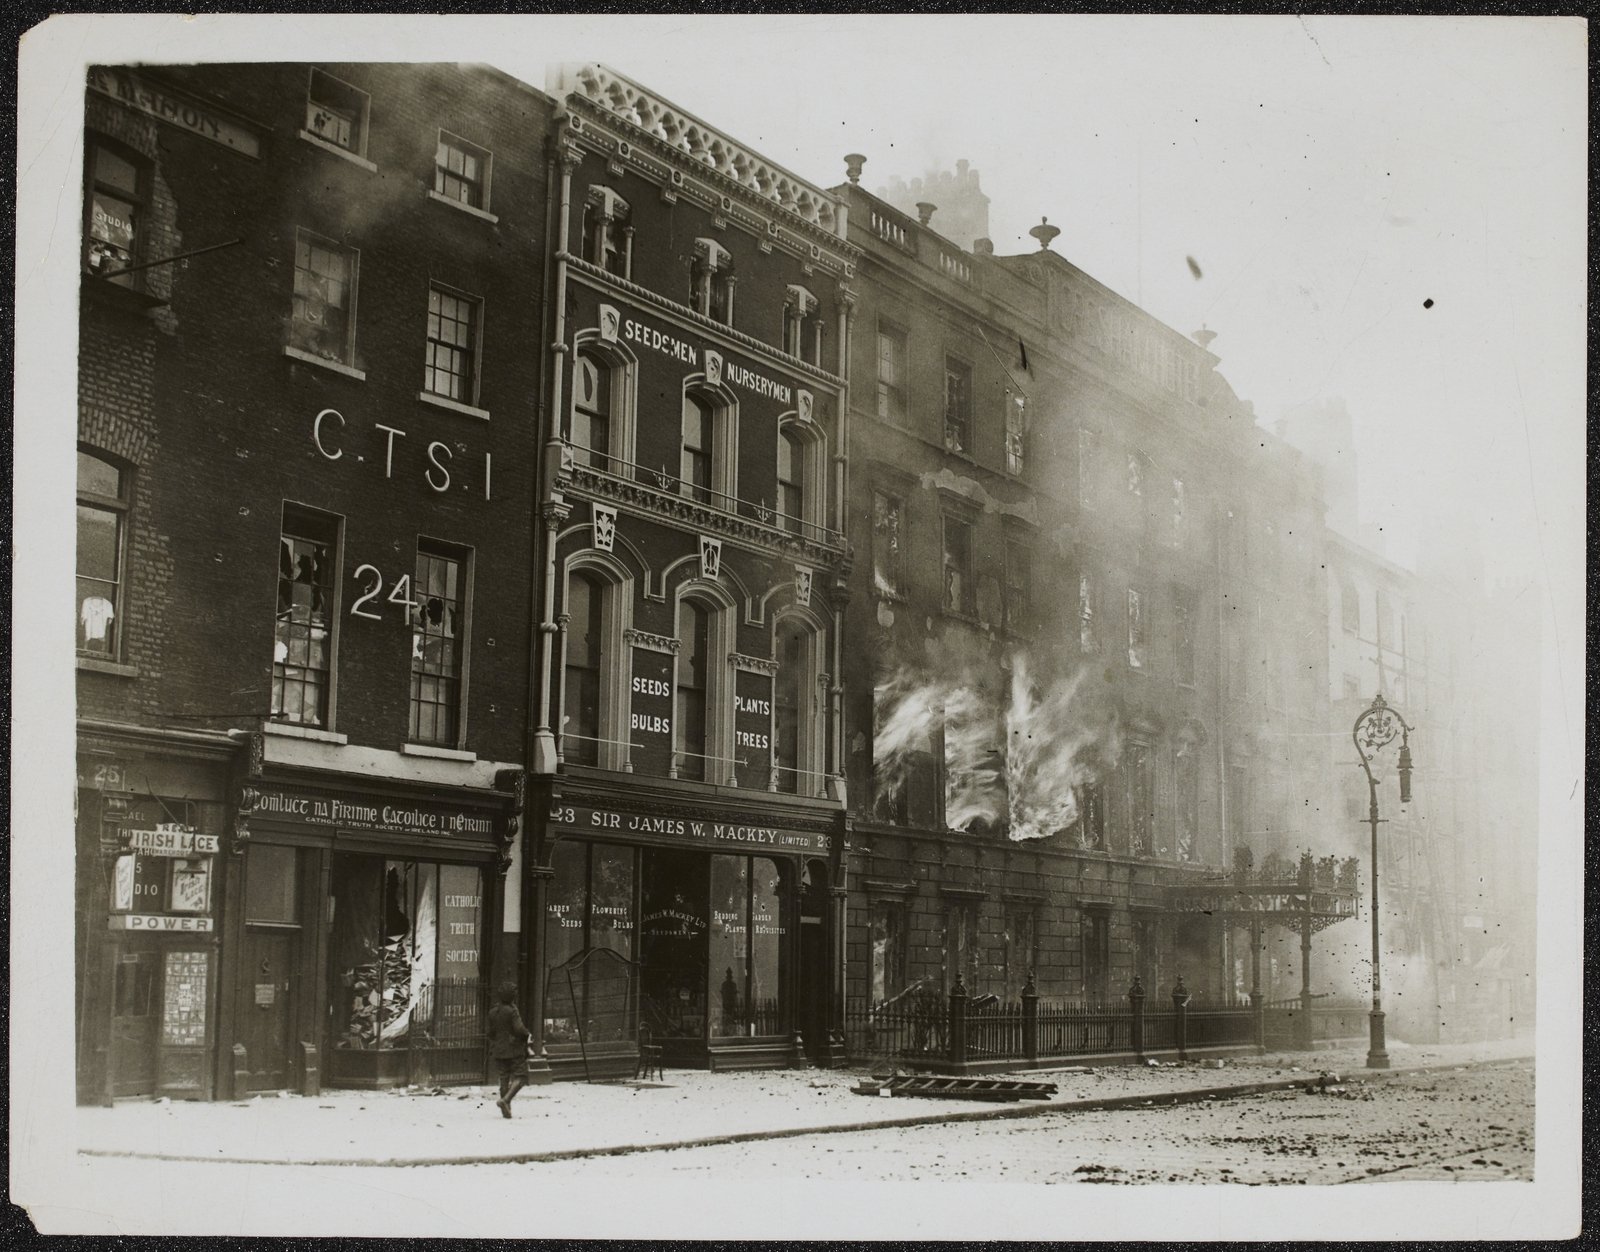 Image - The Gresham hotel as the fires took hold... (Credit: National Library of Ireland)